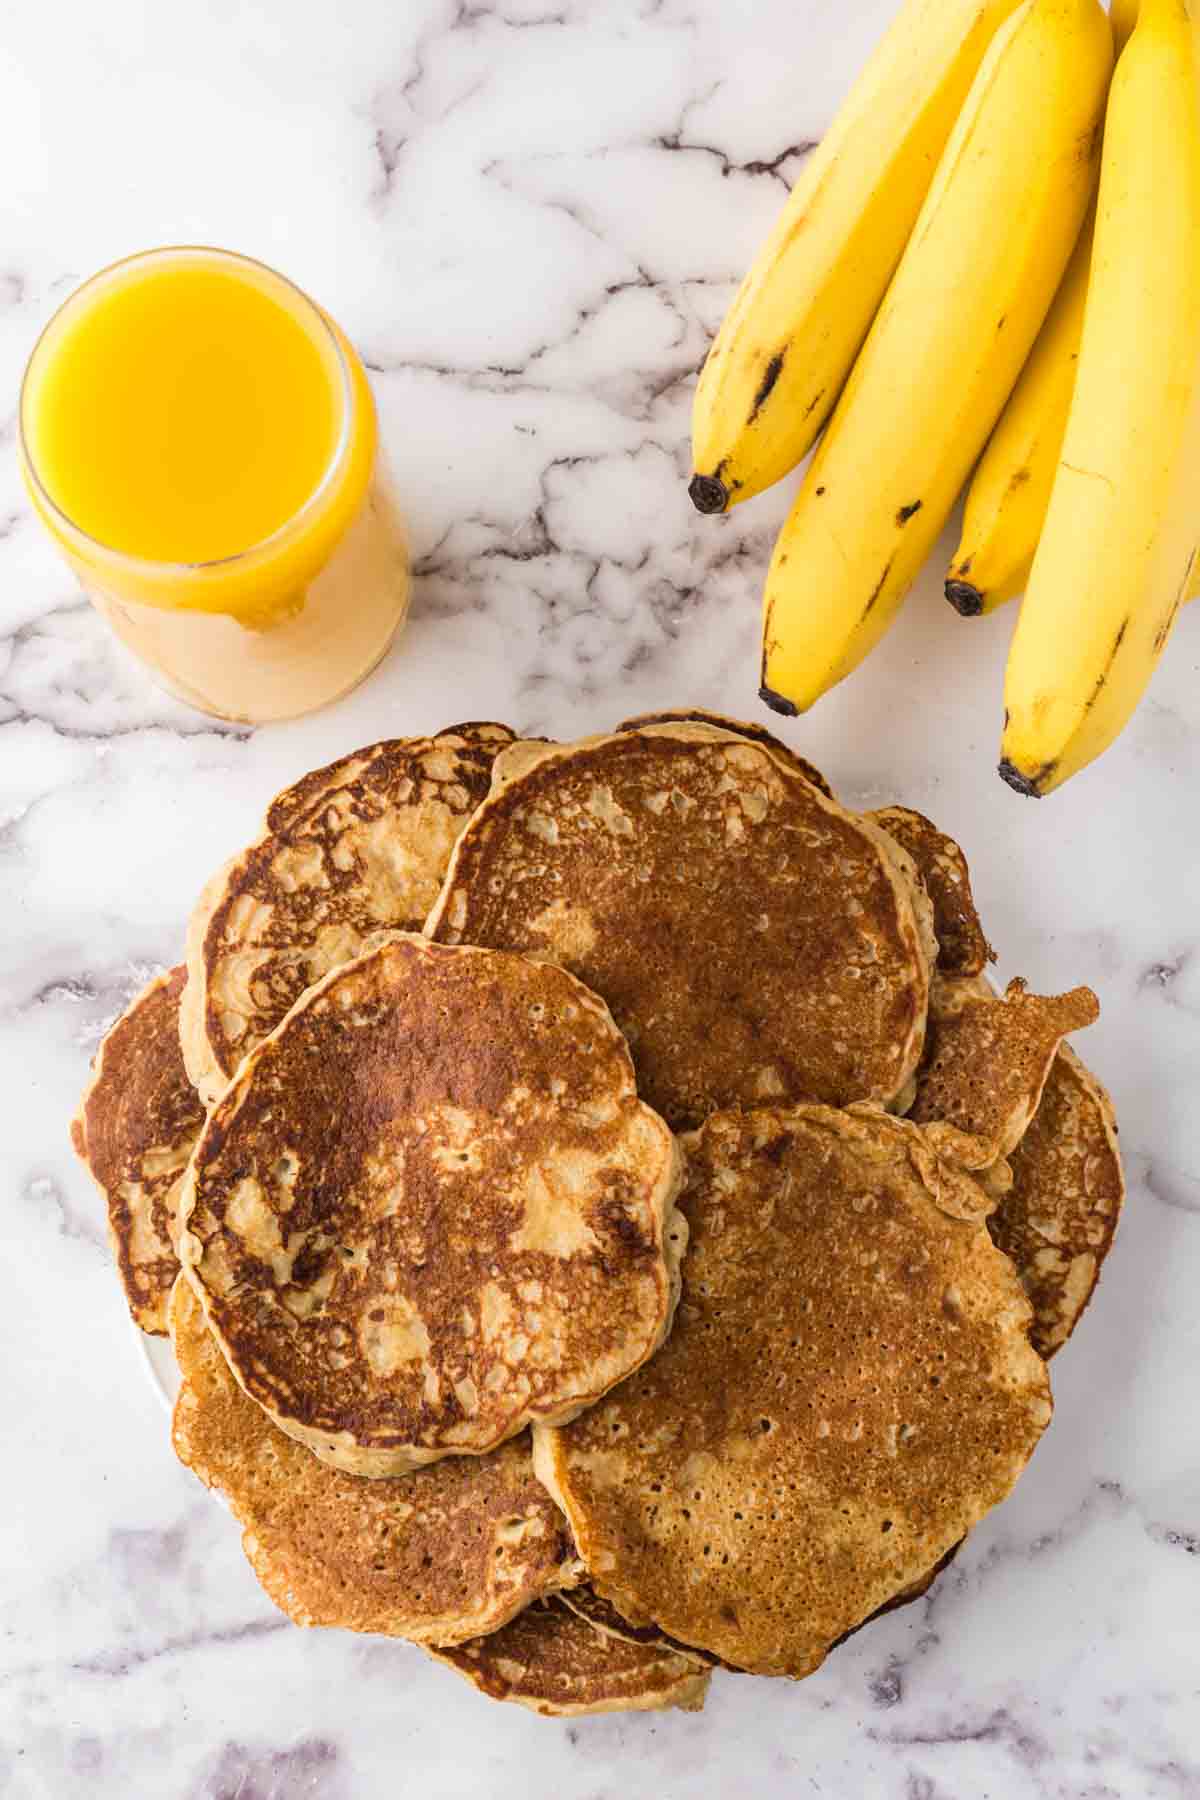 stack of banana pancakes with bananas and a top view of a glass of orange juice